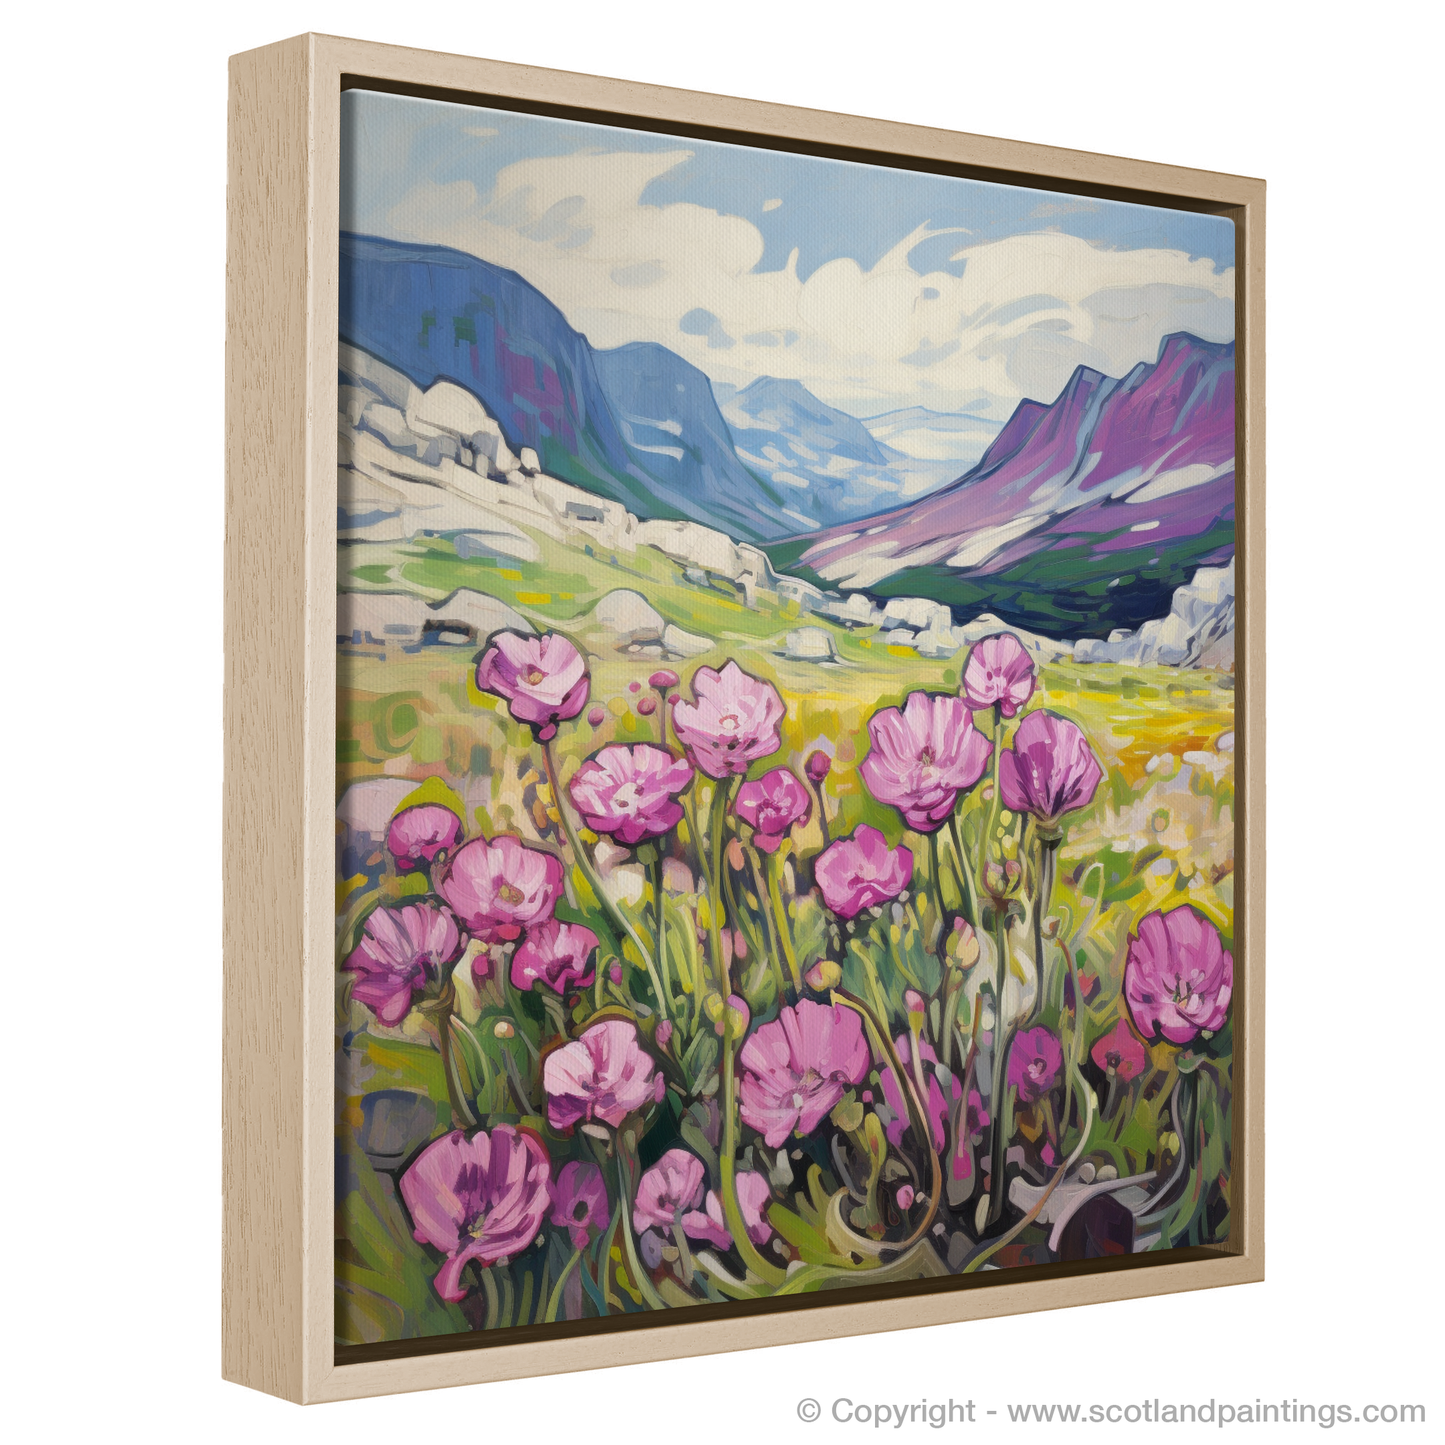 Vivid Cairngorms: A Fauvist Homage to Moss Campion